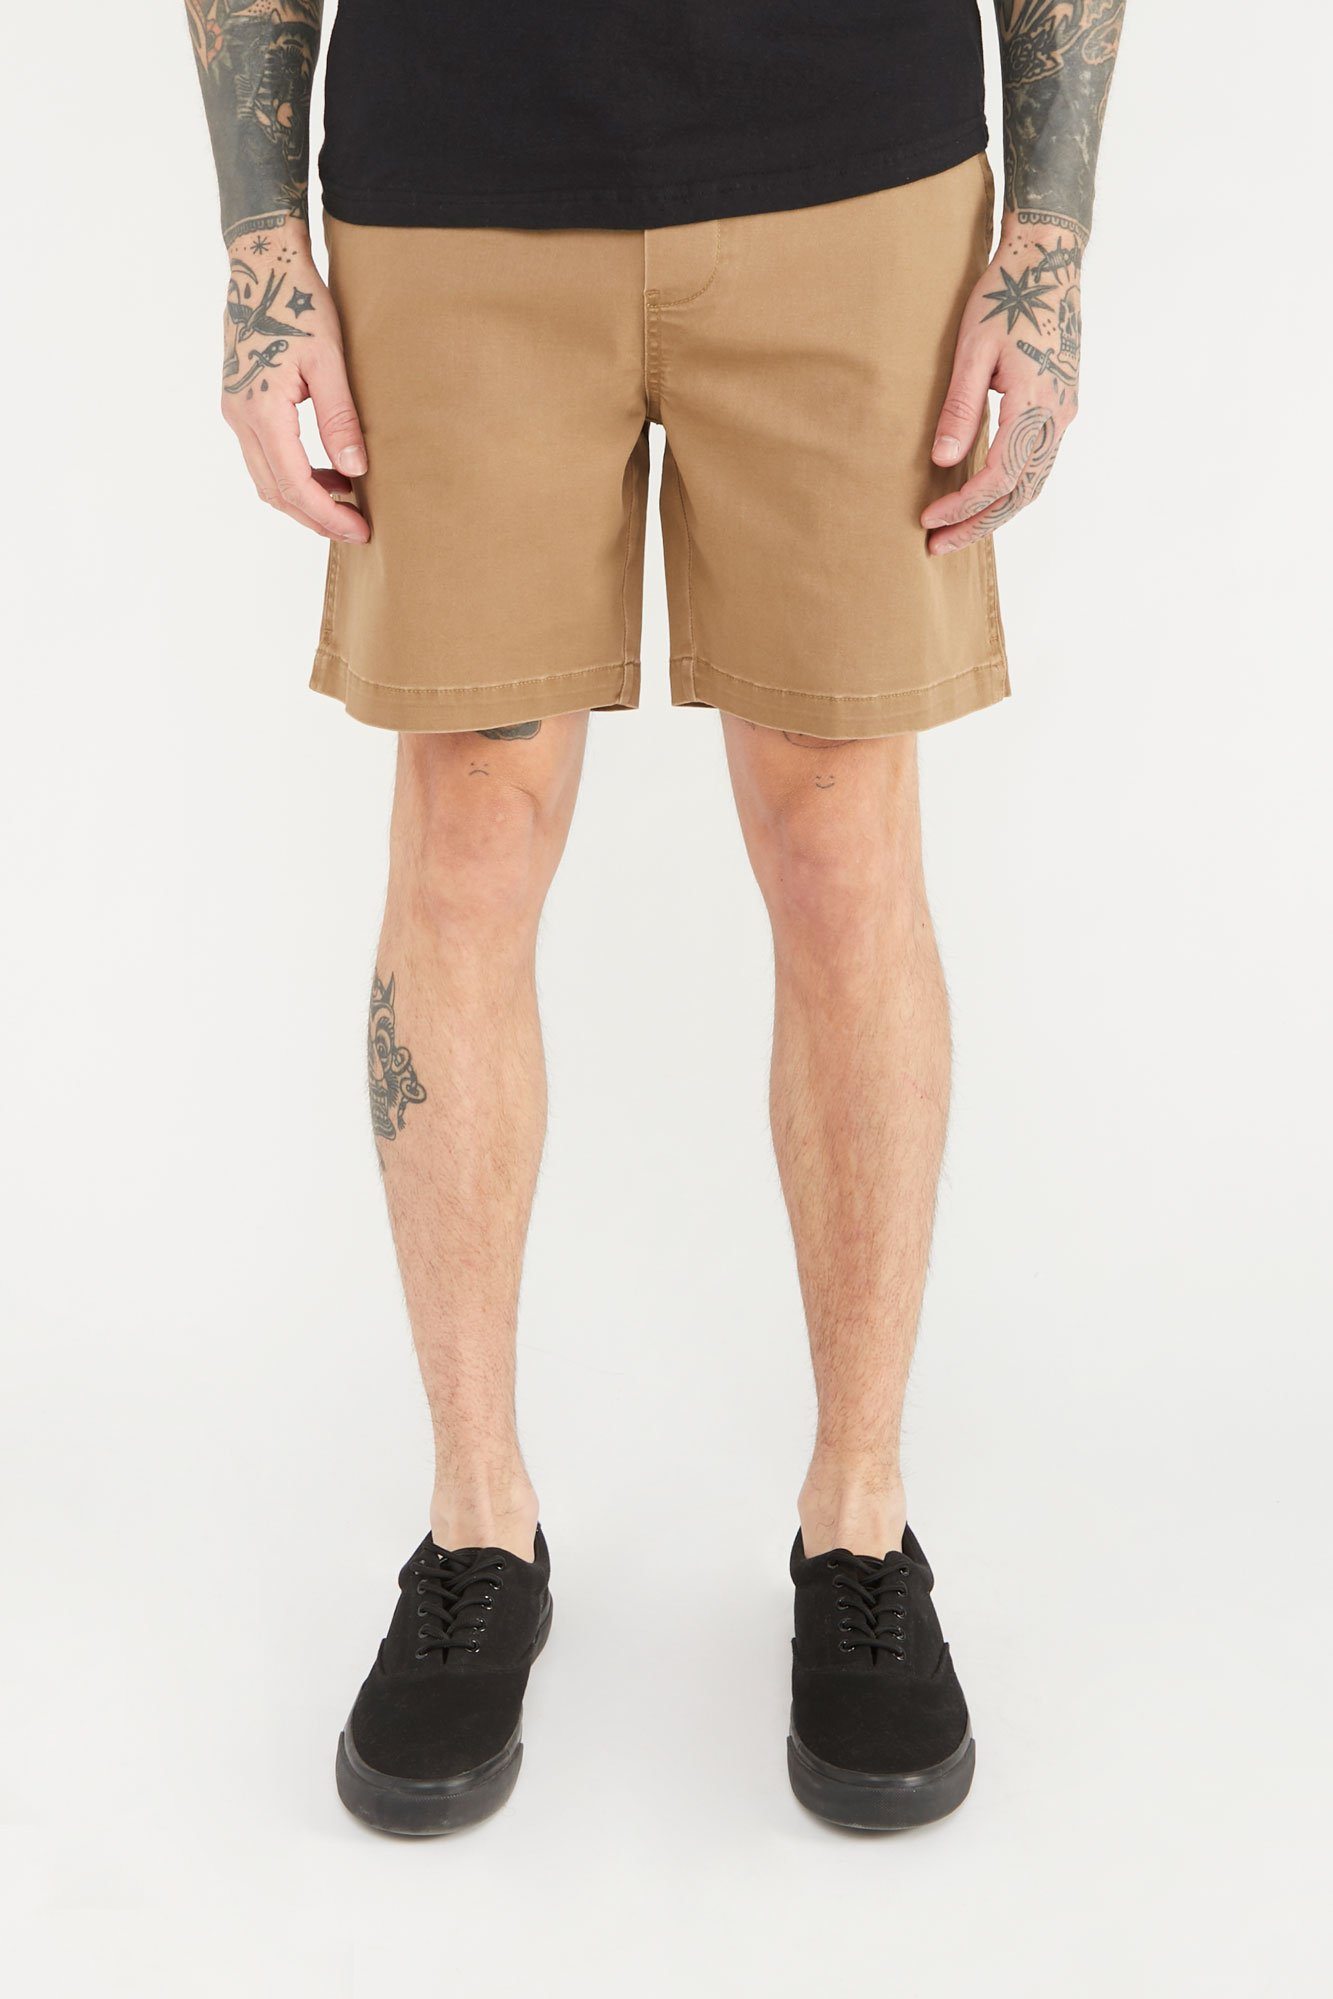 Image of Zoo York Mens Solid Pull-On Shorts